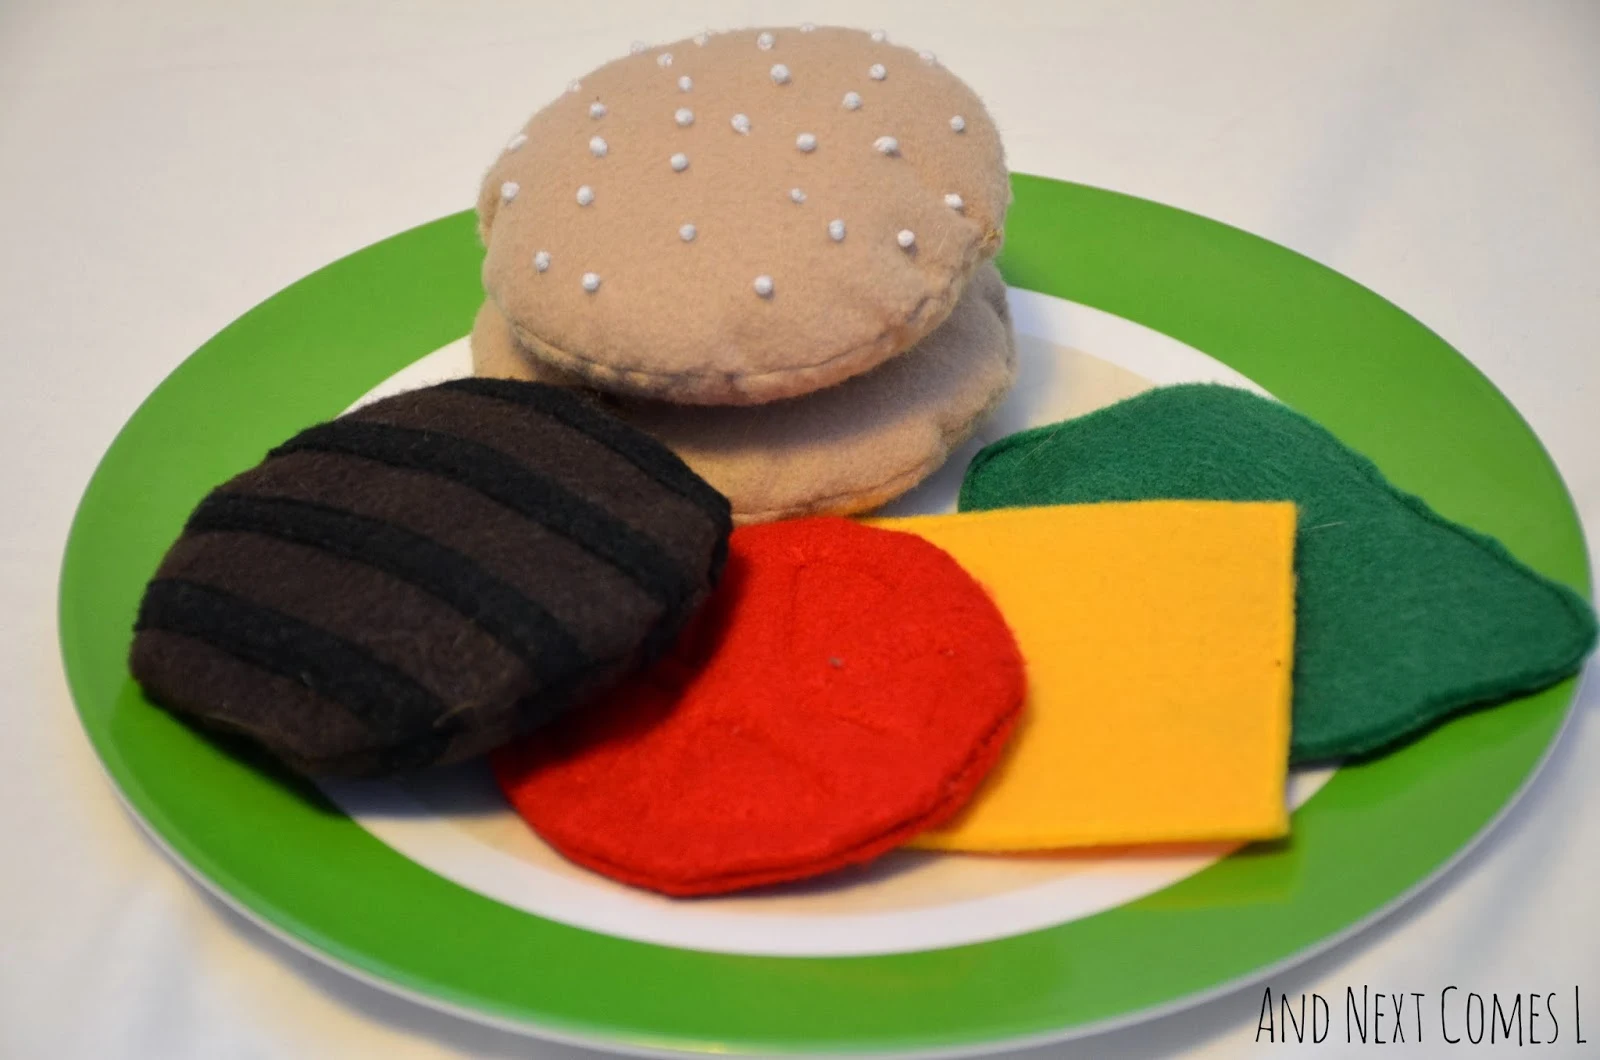 Felt hamburger play food for kids from And Next Comes L